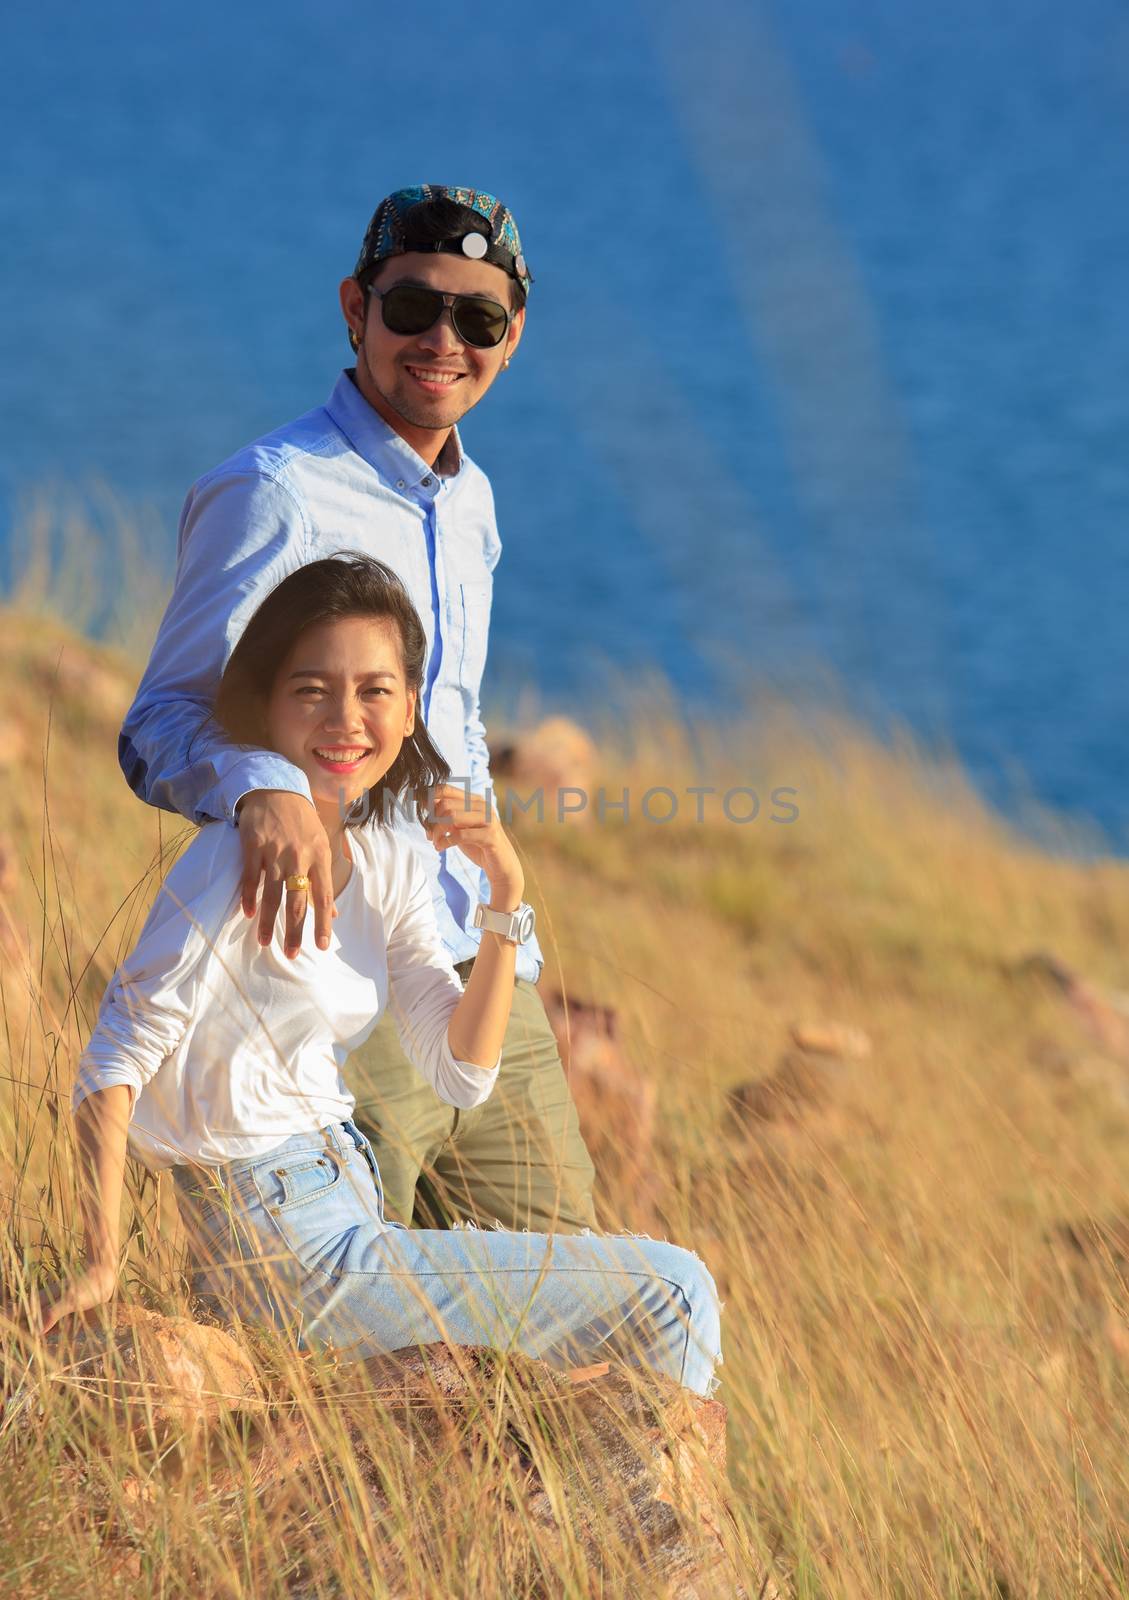 portrait of asian younger man and woman relaxing vacation at sea by khunaspix